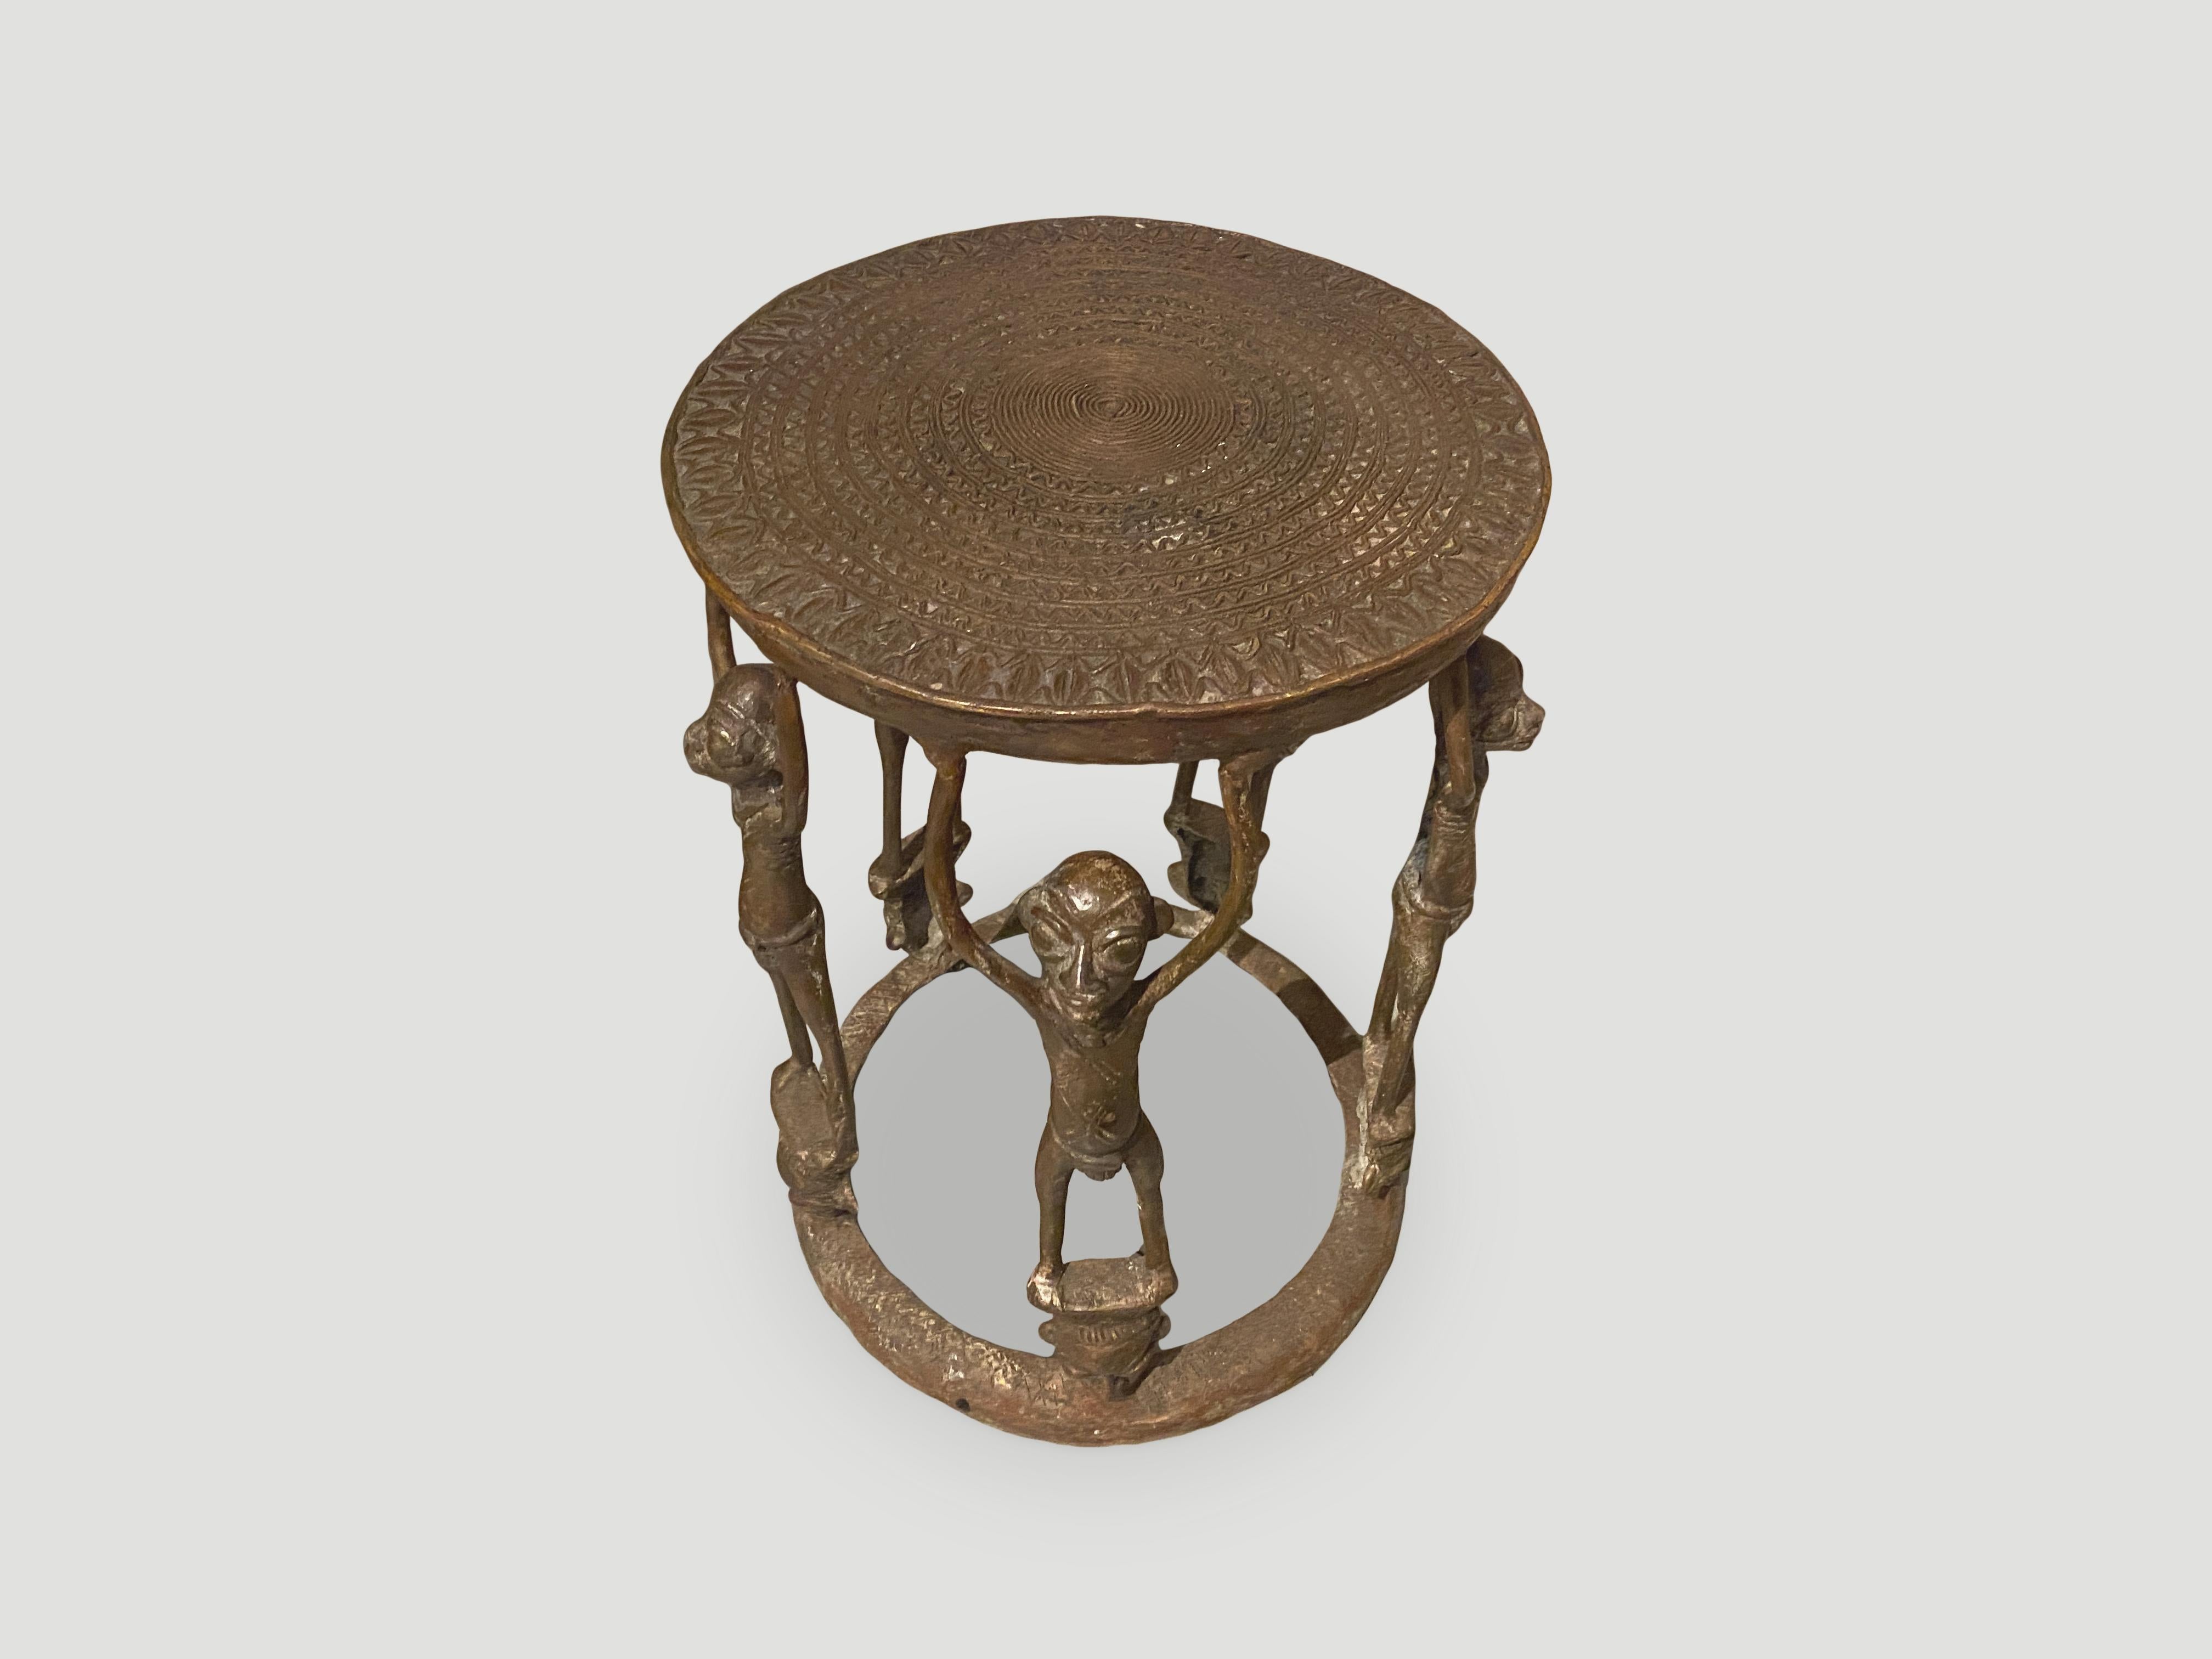 Antique bronze figural side table, from Cameroon. Mid 20th century. Two tiered table with bronze figures resting above masks on the lower level. Whimsical and unique. We only select the best. 

This side table was sourced in the spirit of